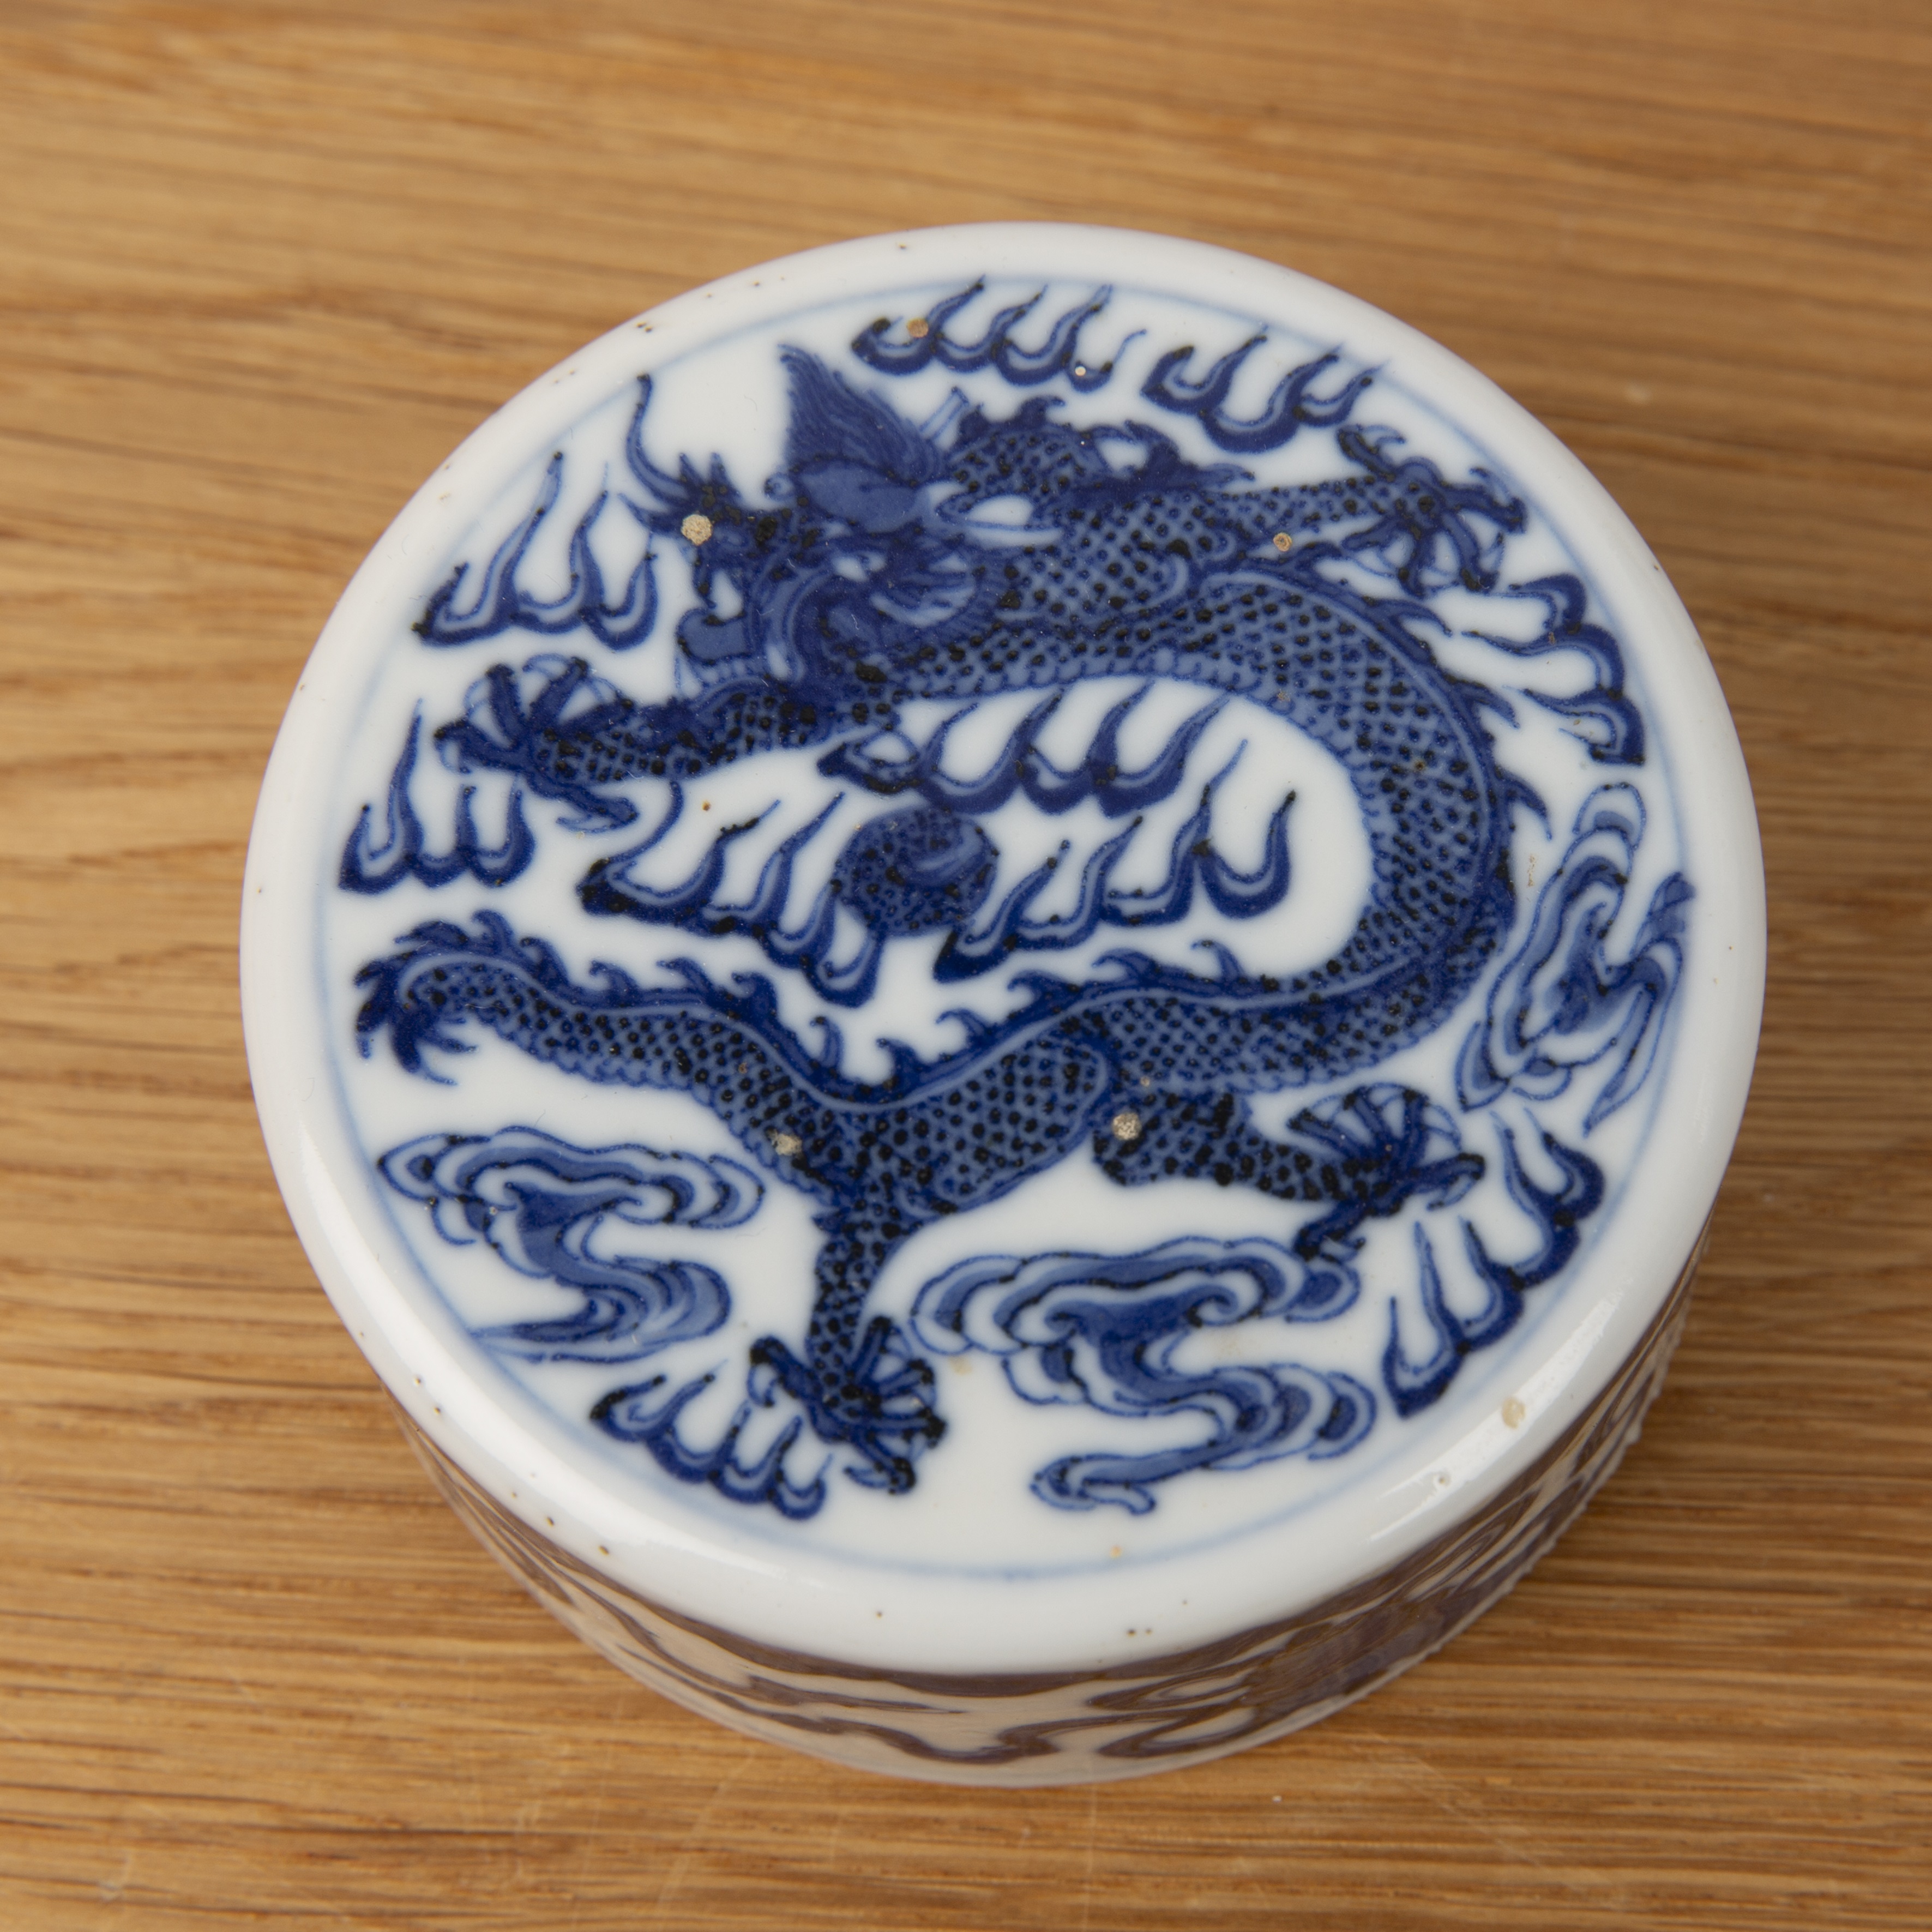 Ovoid blue and white vase and cover Chinese, 19th Century painted with a dragon and flaming - Image 4 of 4